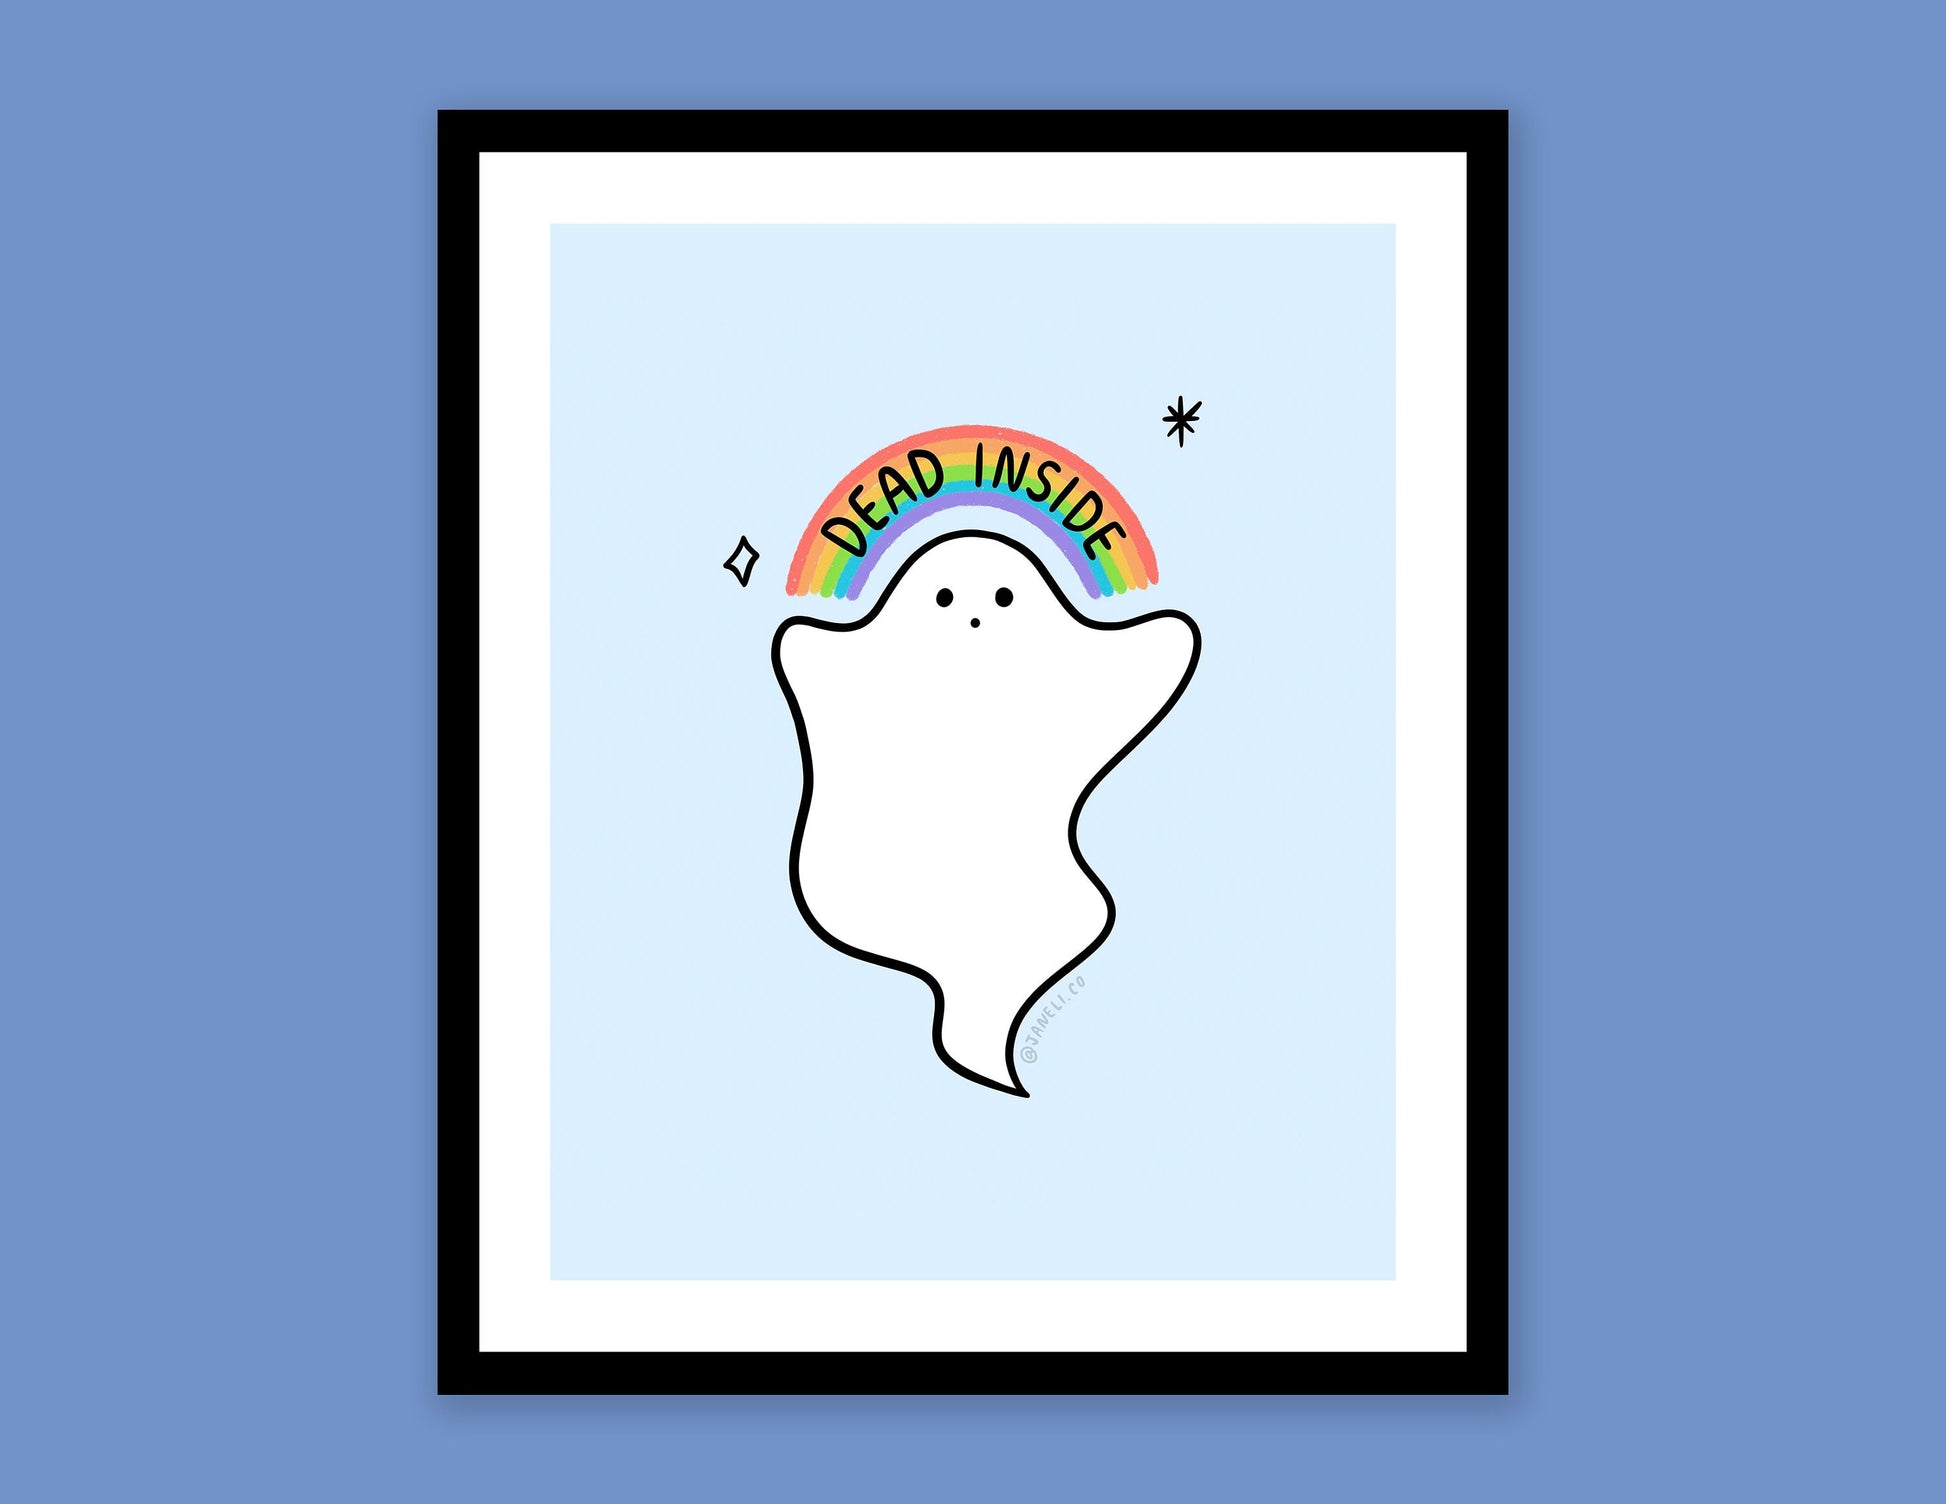 A digital mock of a framed JaneLi.Co print that shows a little white ghost holding up a rainbow that says "Dead Inside" over a navy blue background.